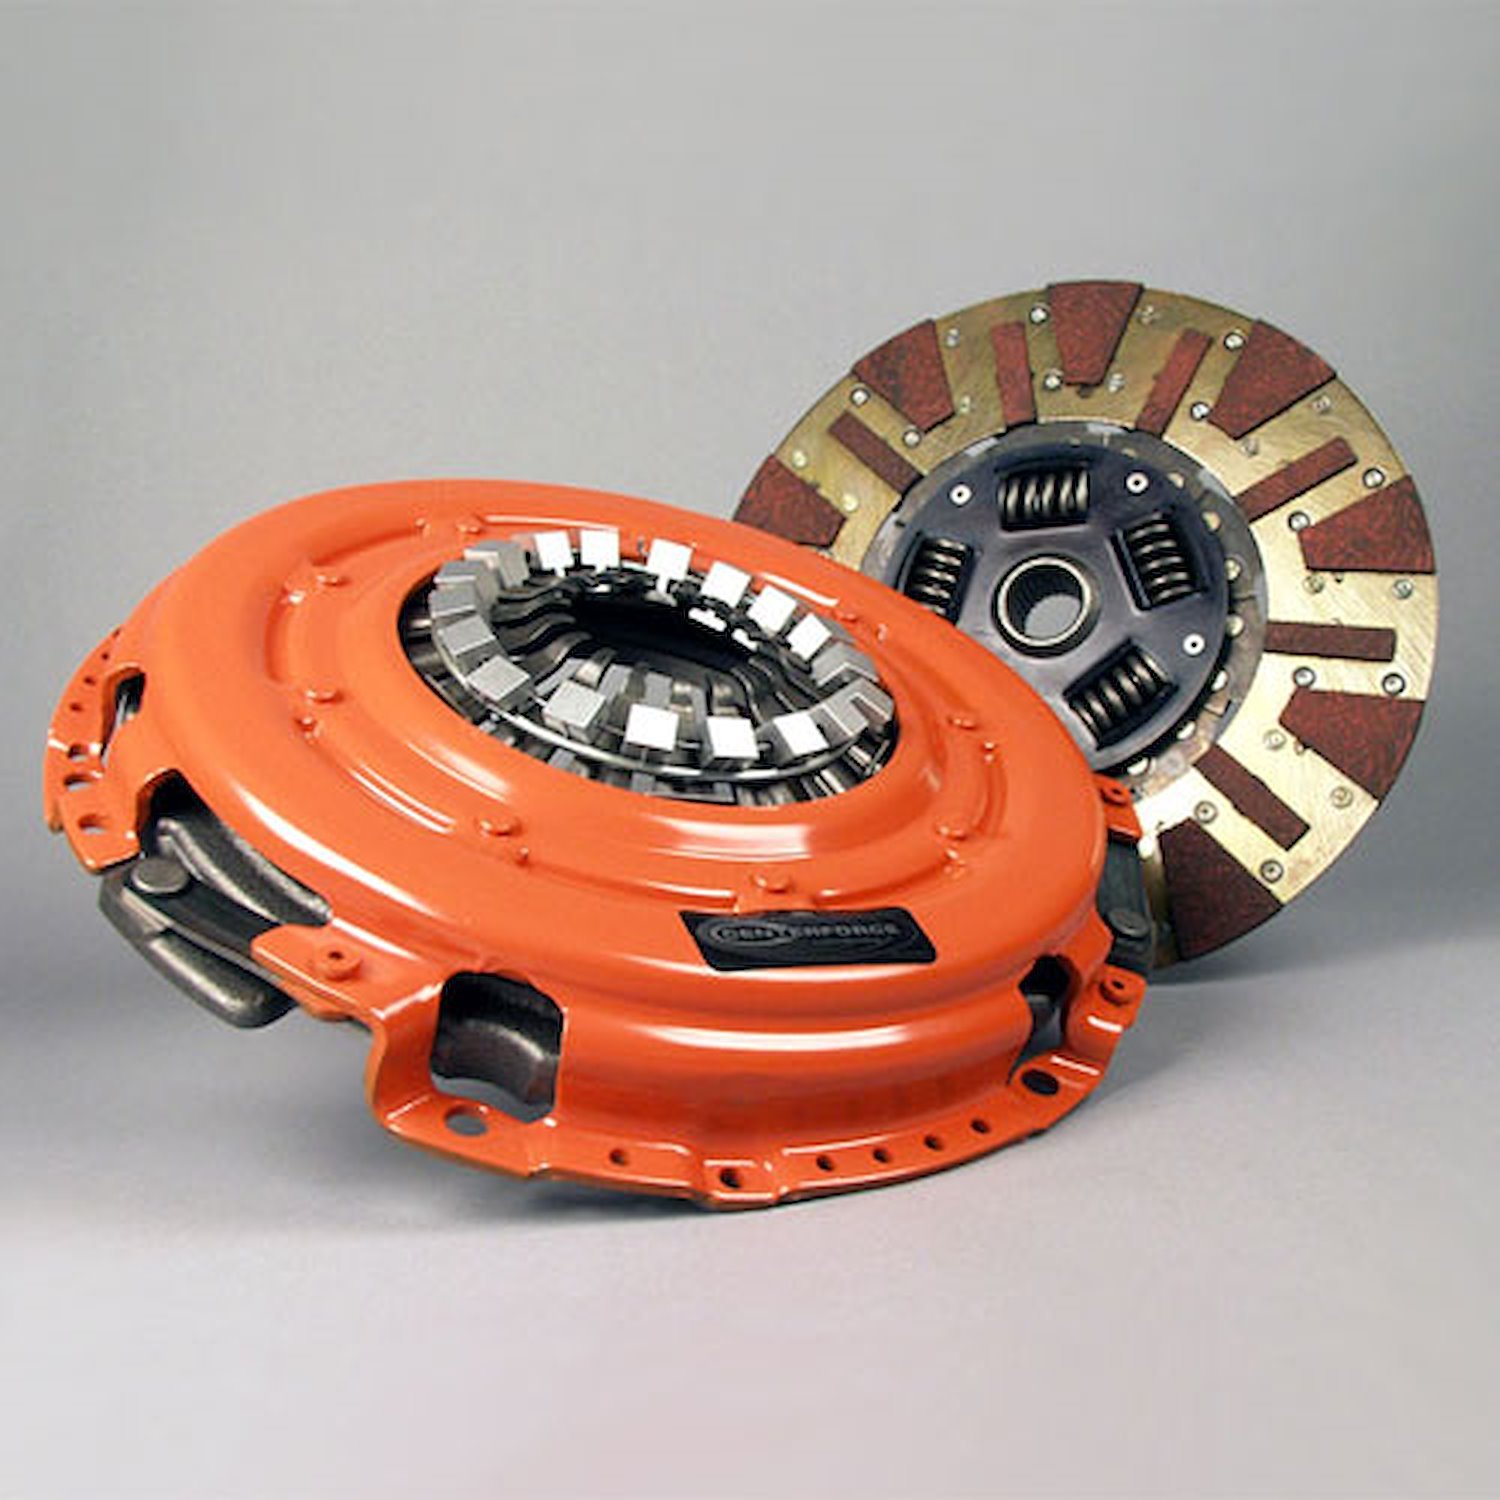 Dual Friction Clutch Includes Pressure Plate, Disc, Flywheel, & Bolts